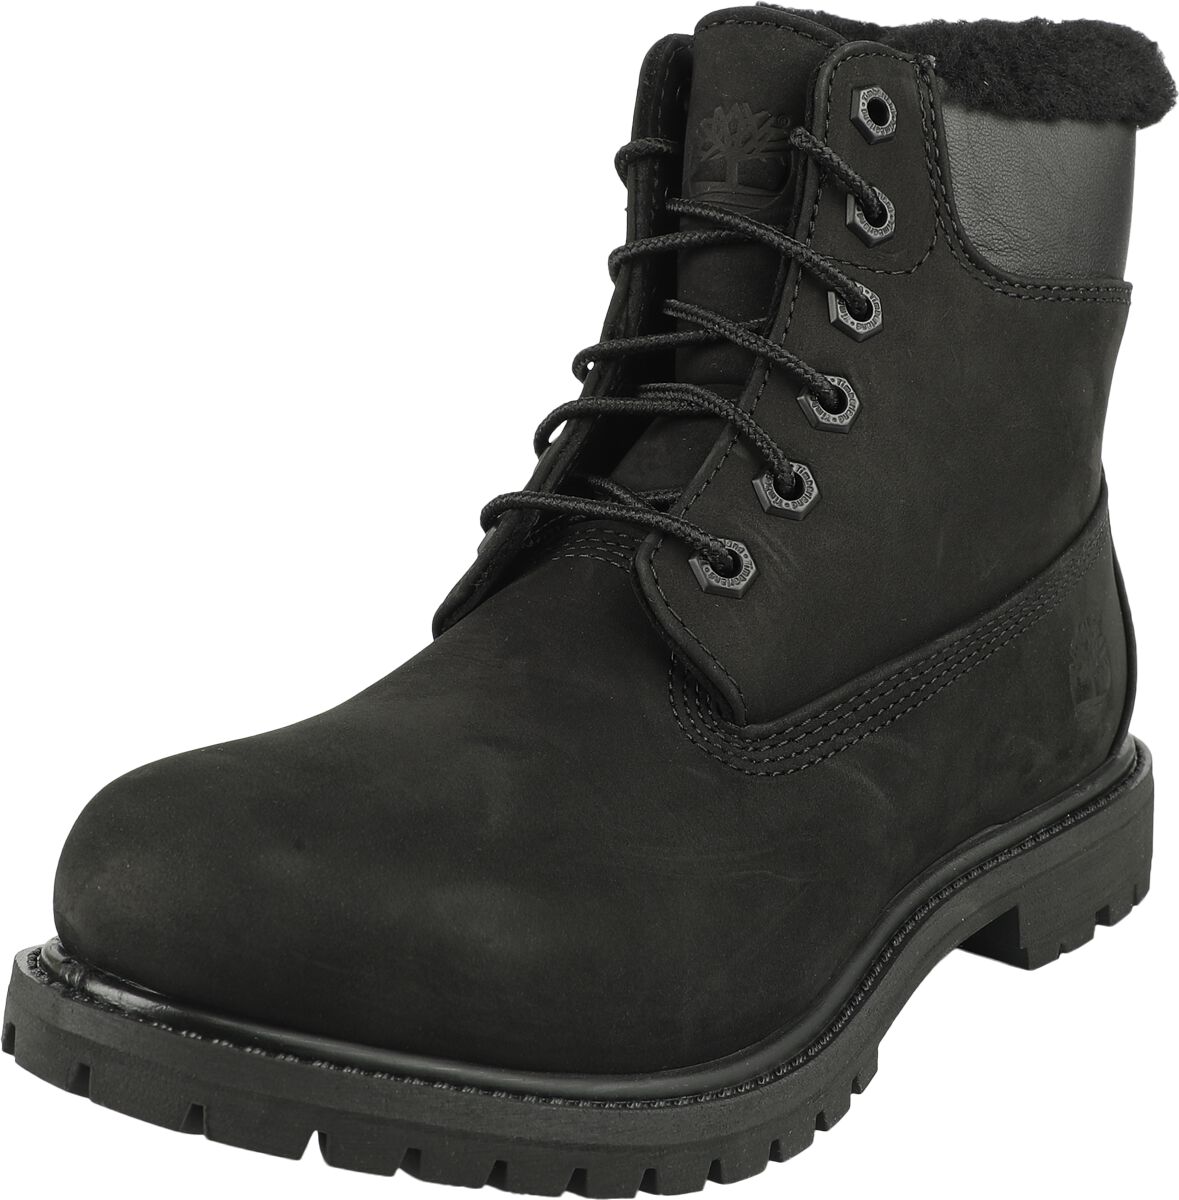 Timberland 6 Inch Premium Shearling Lined WP Boot Boot schwarz in EU41